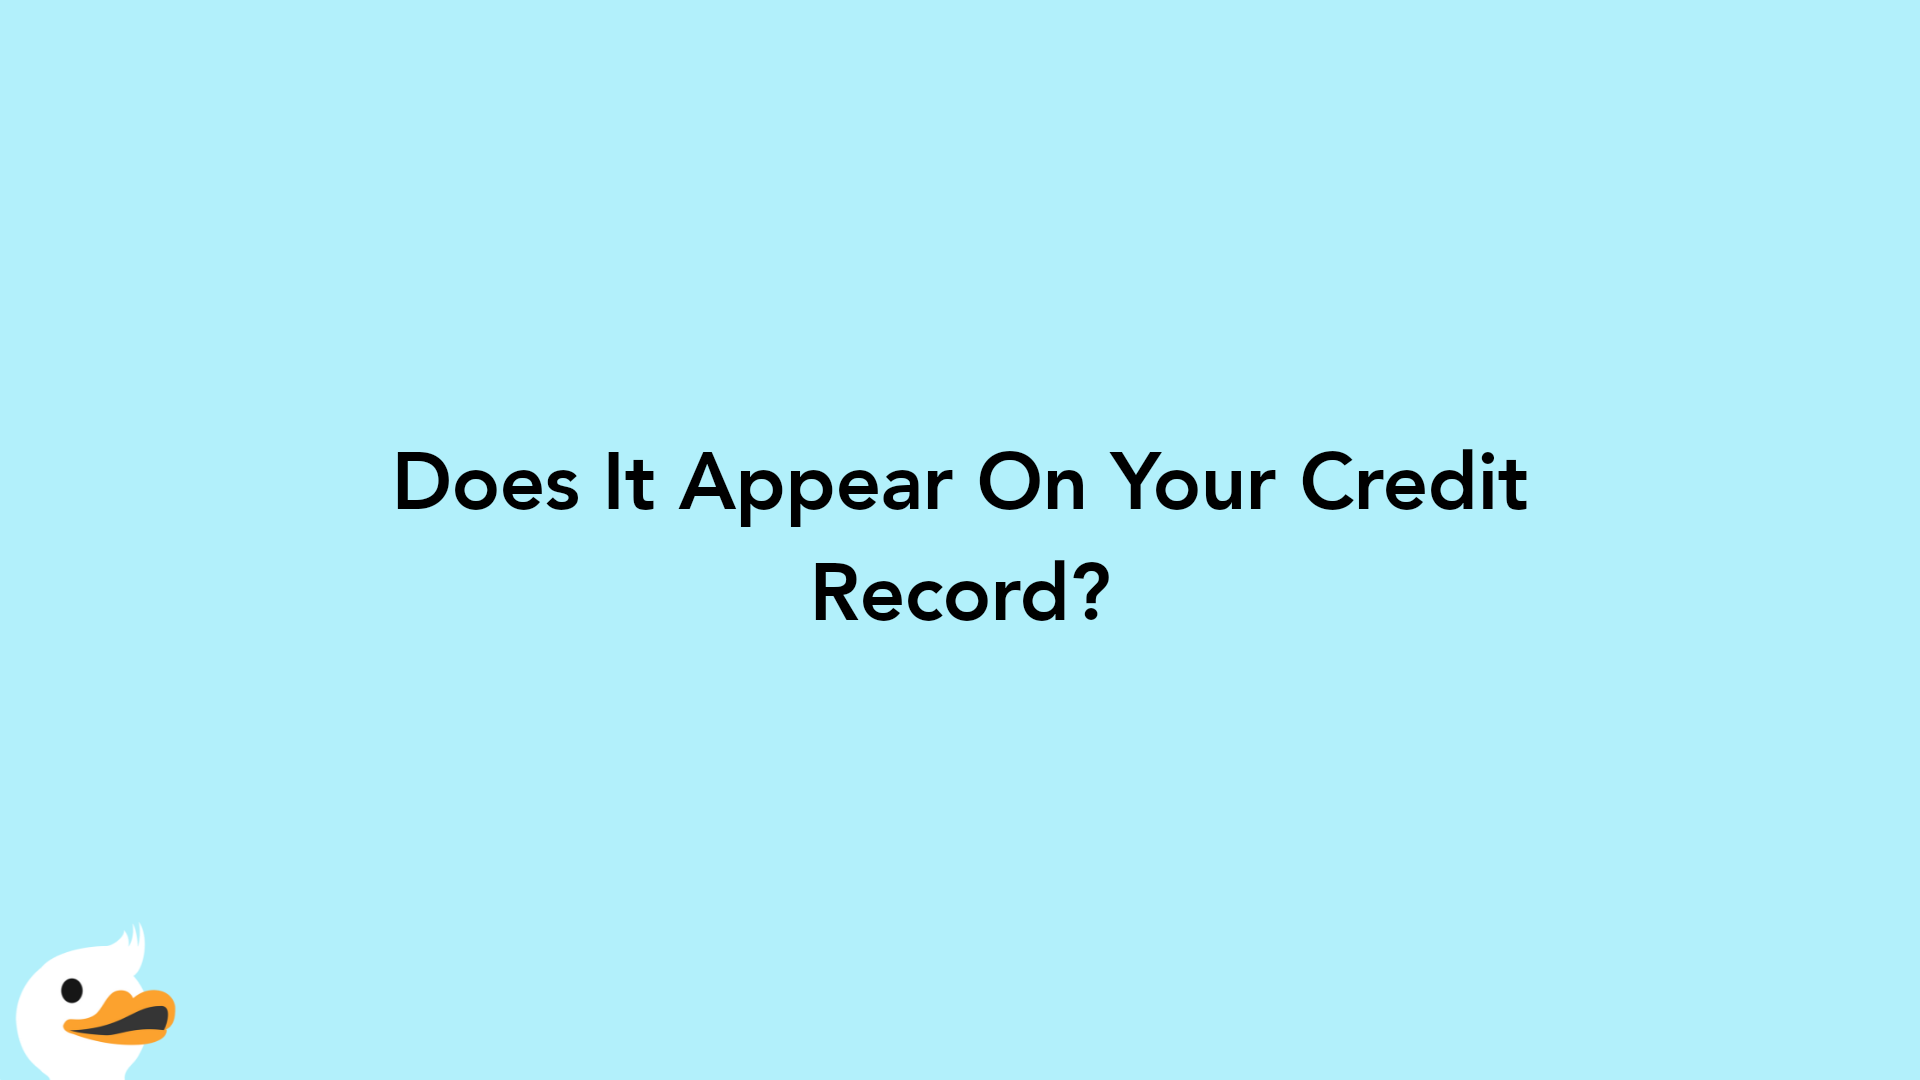 Does It Appear On Your Credit Record?